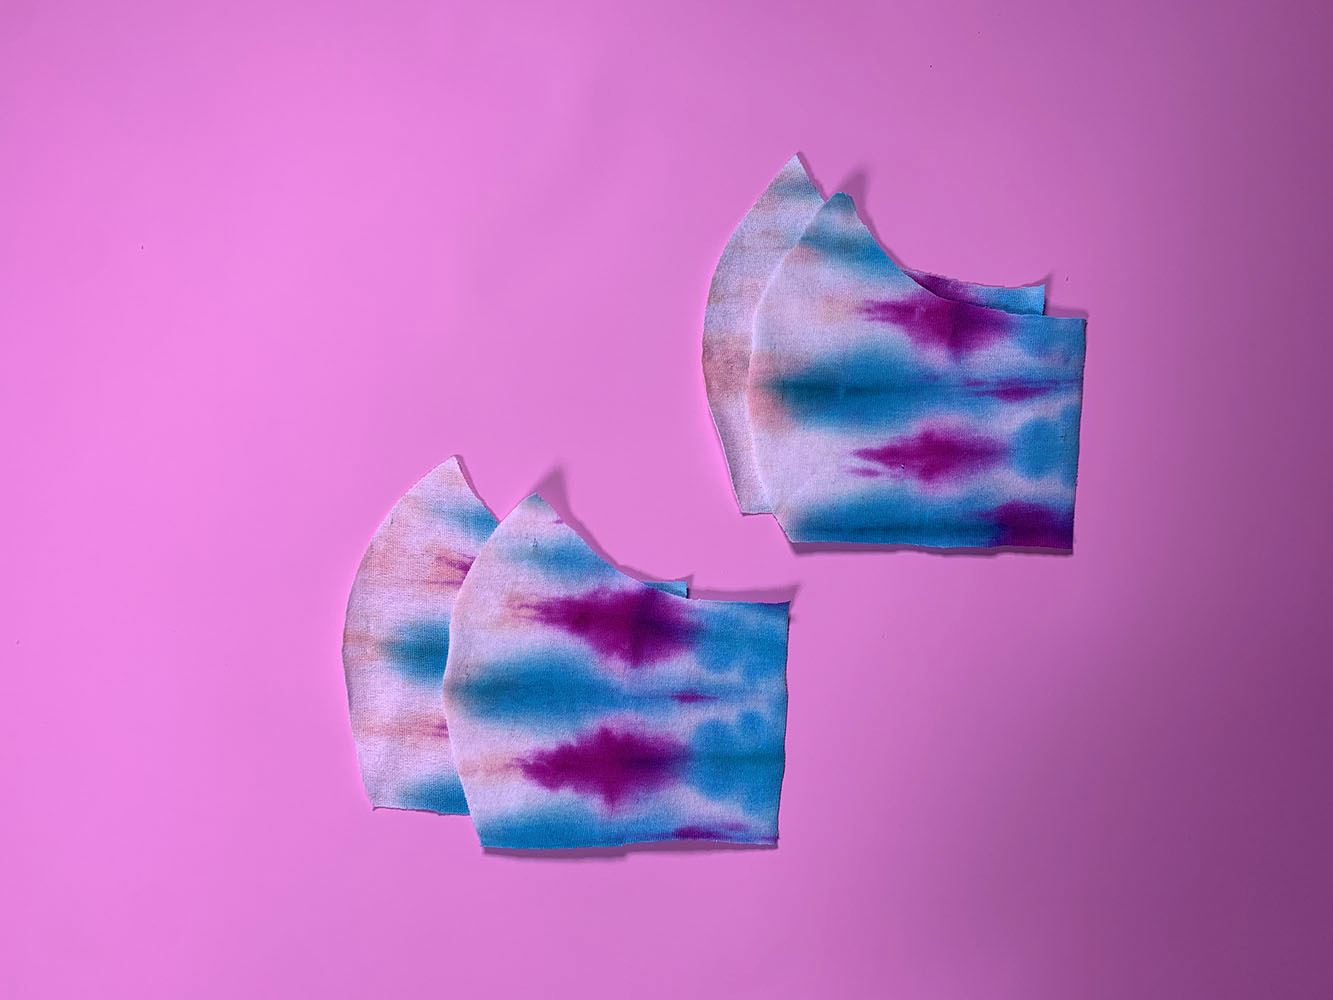 Tulip Tie-Dye Face Mask Tutorial - use pattern to cut fabric